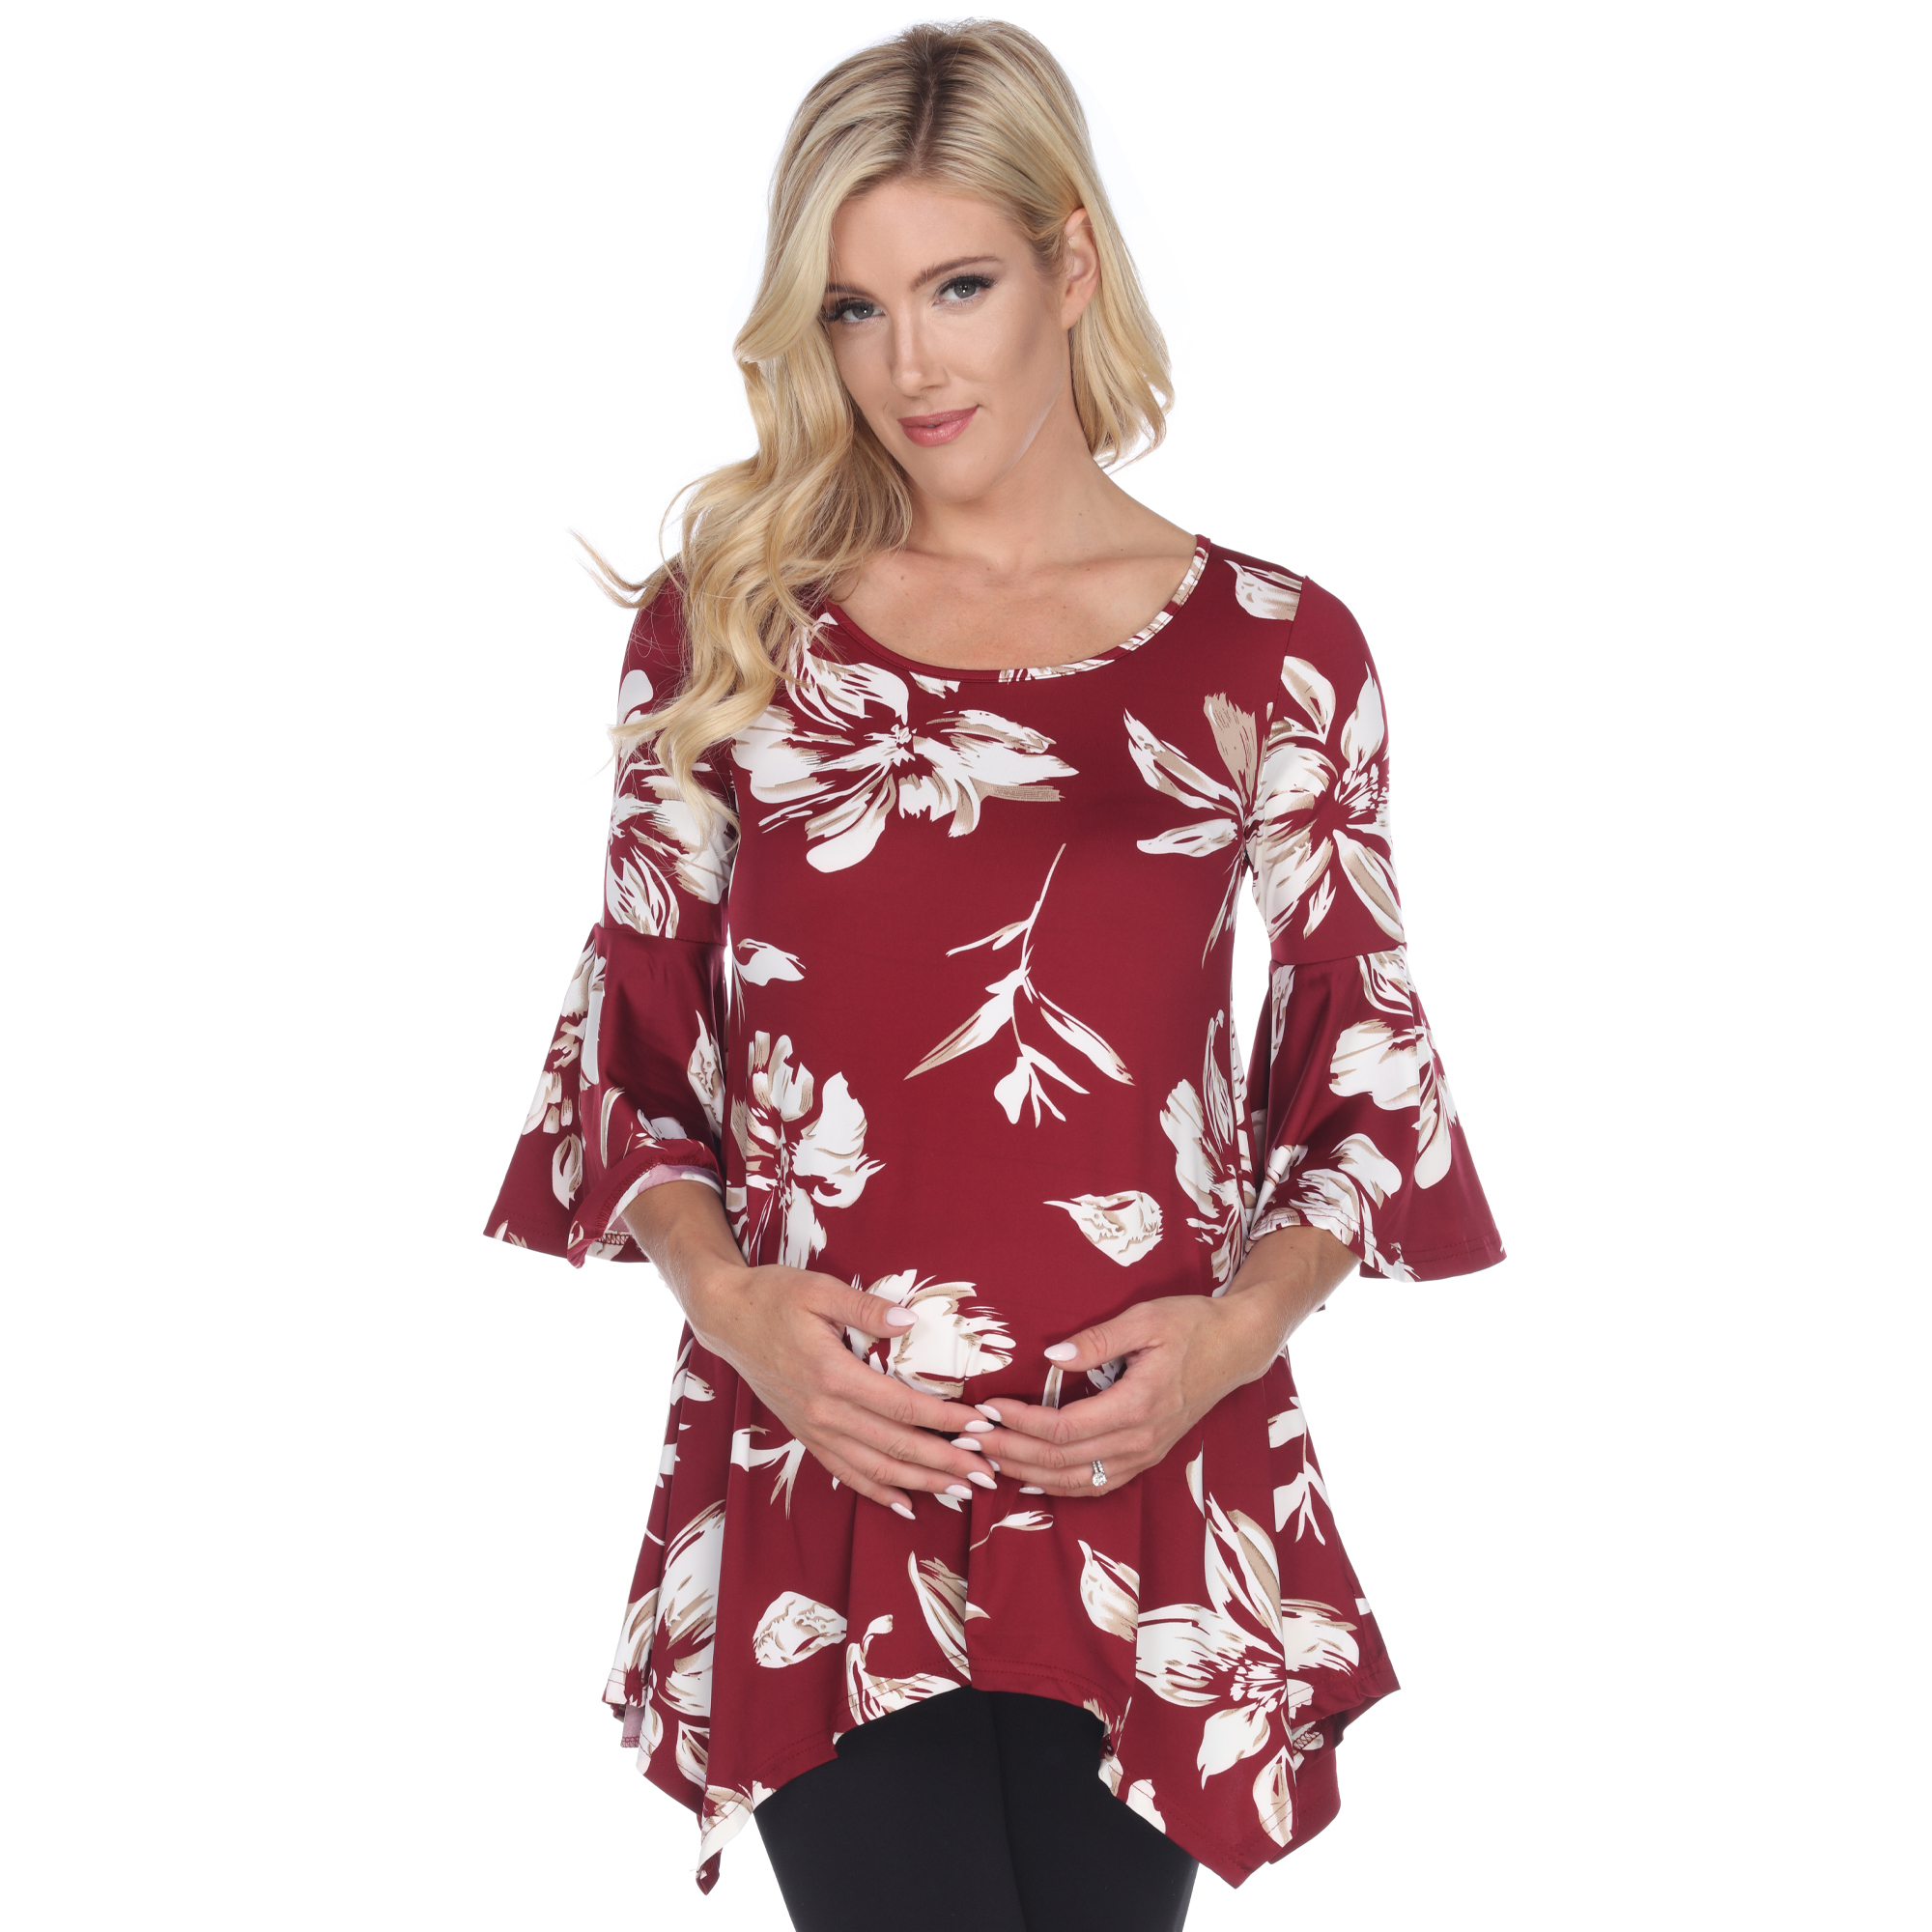 White Mark Women's Maternity Floral Print Quarter Sleeve Tunic Top With Pockets - Black, 3X